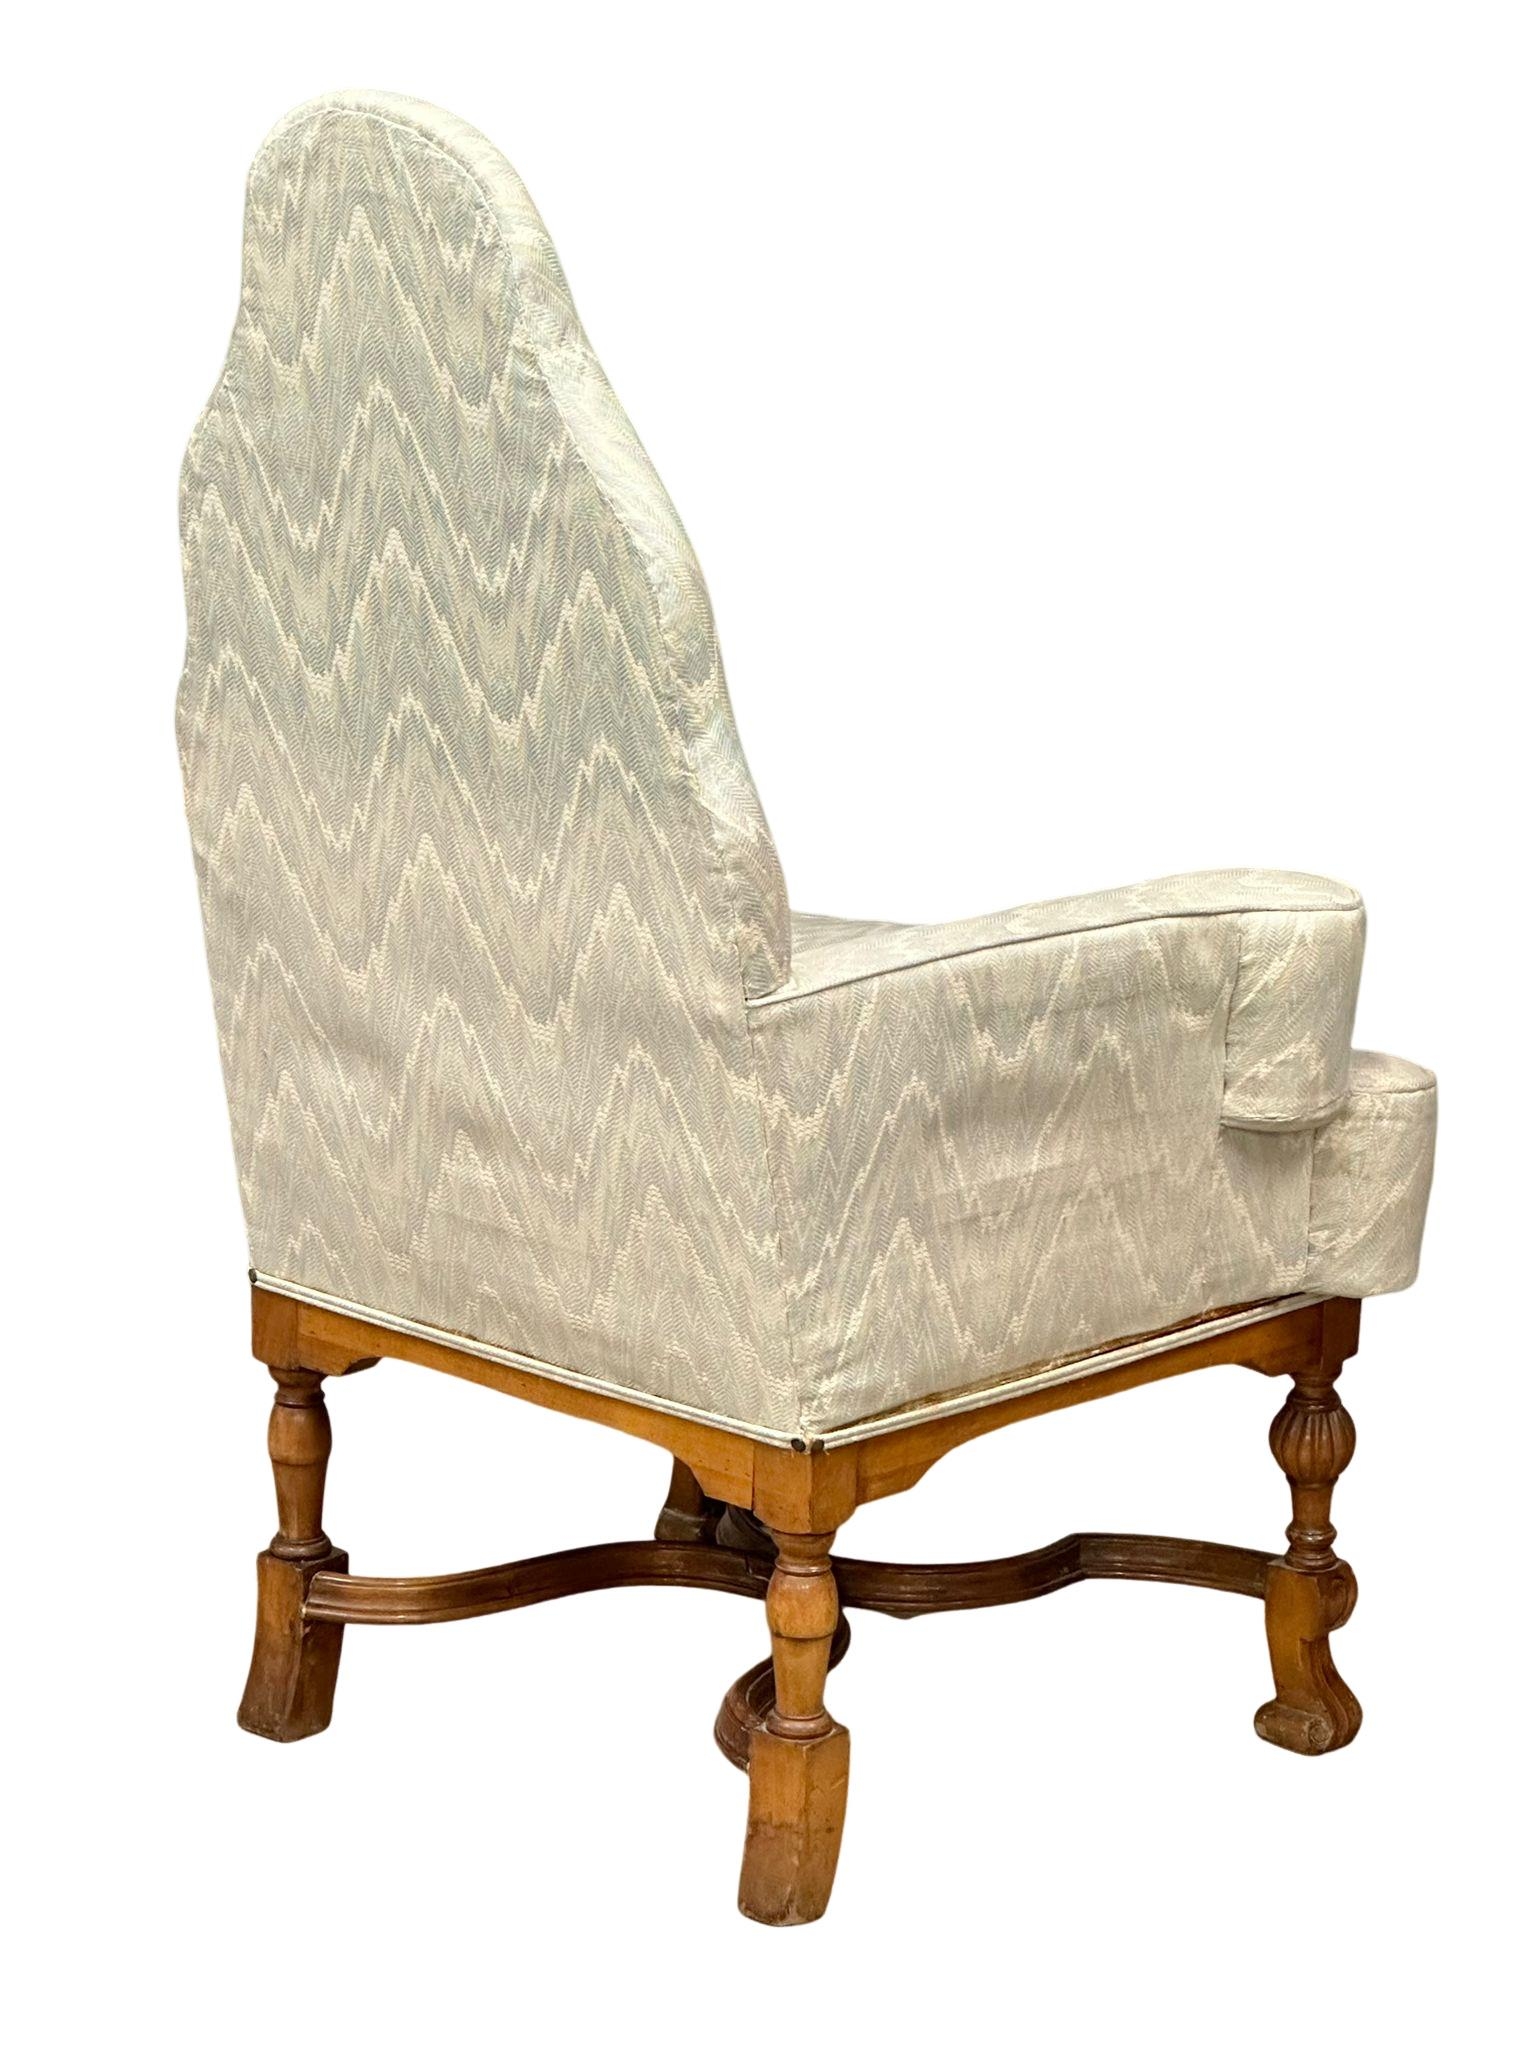 An early 20th century Charles II Carolean Revival armchair. Circa 1930. 63x80x122cm - Image 6 of 7